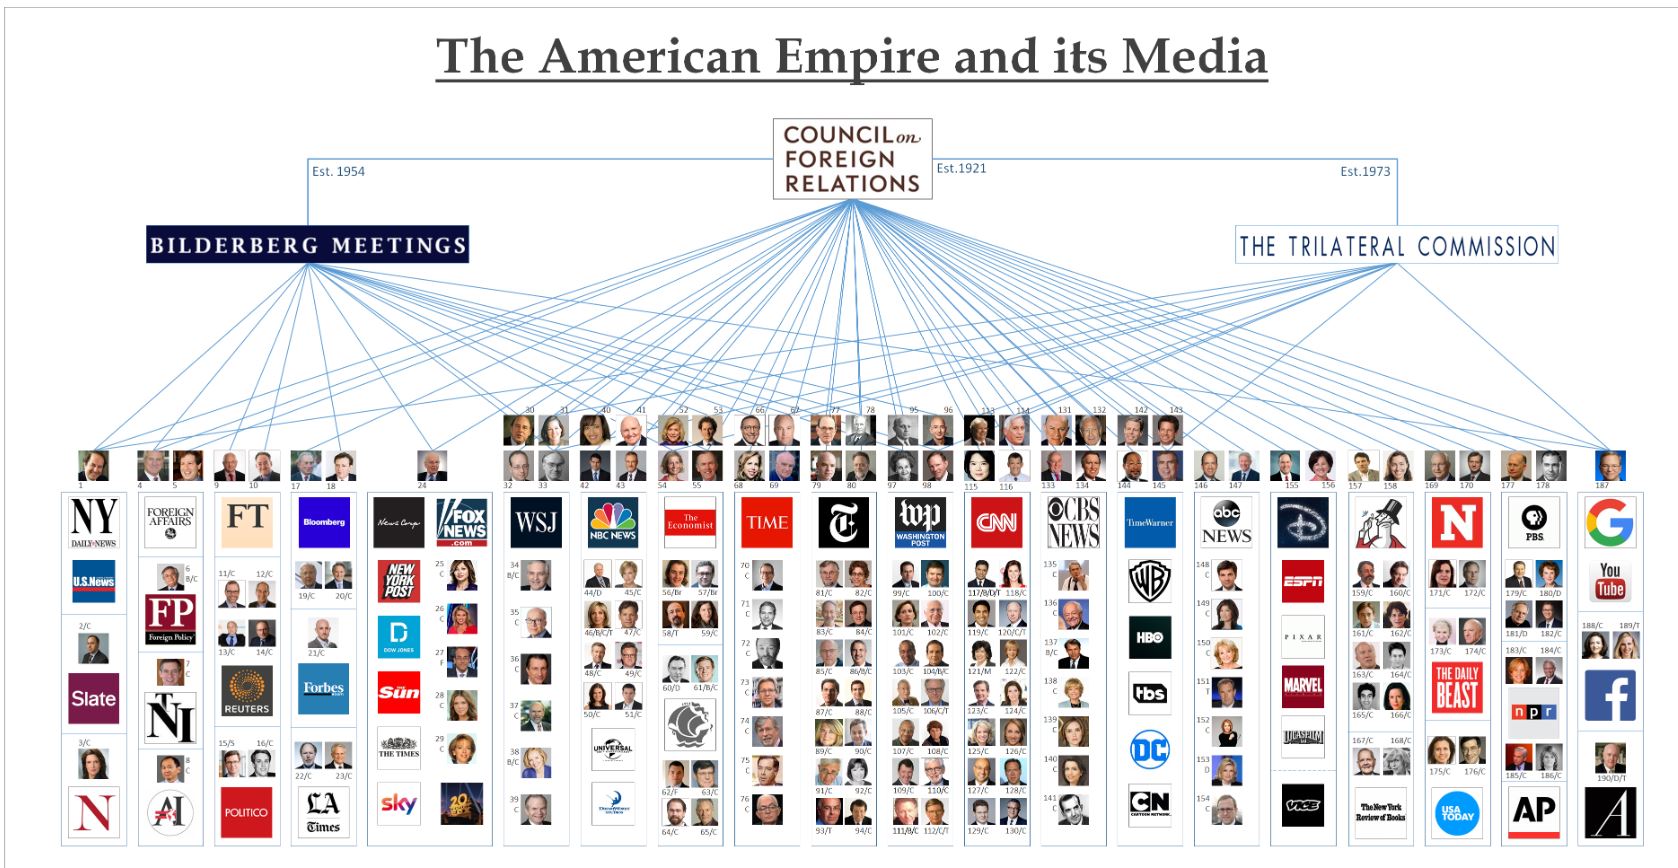 The 1% (elite) MEDIA EMPIRE. The Tool to Control Your Mind